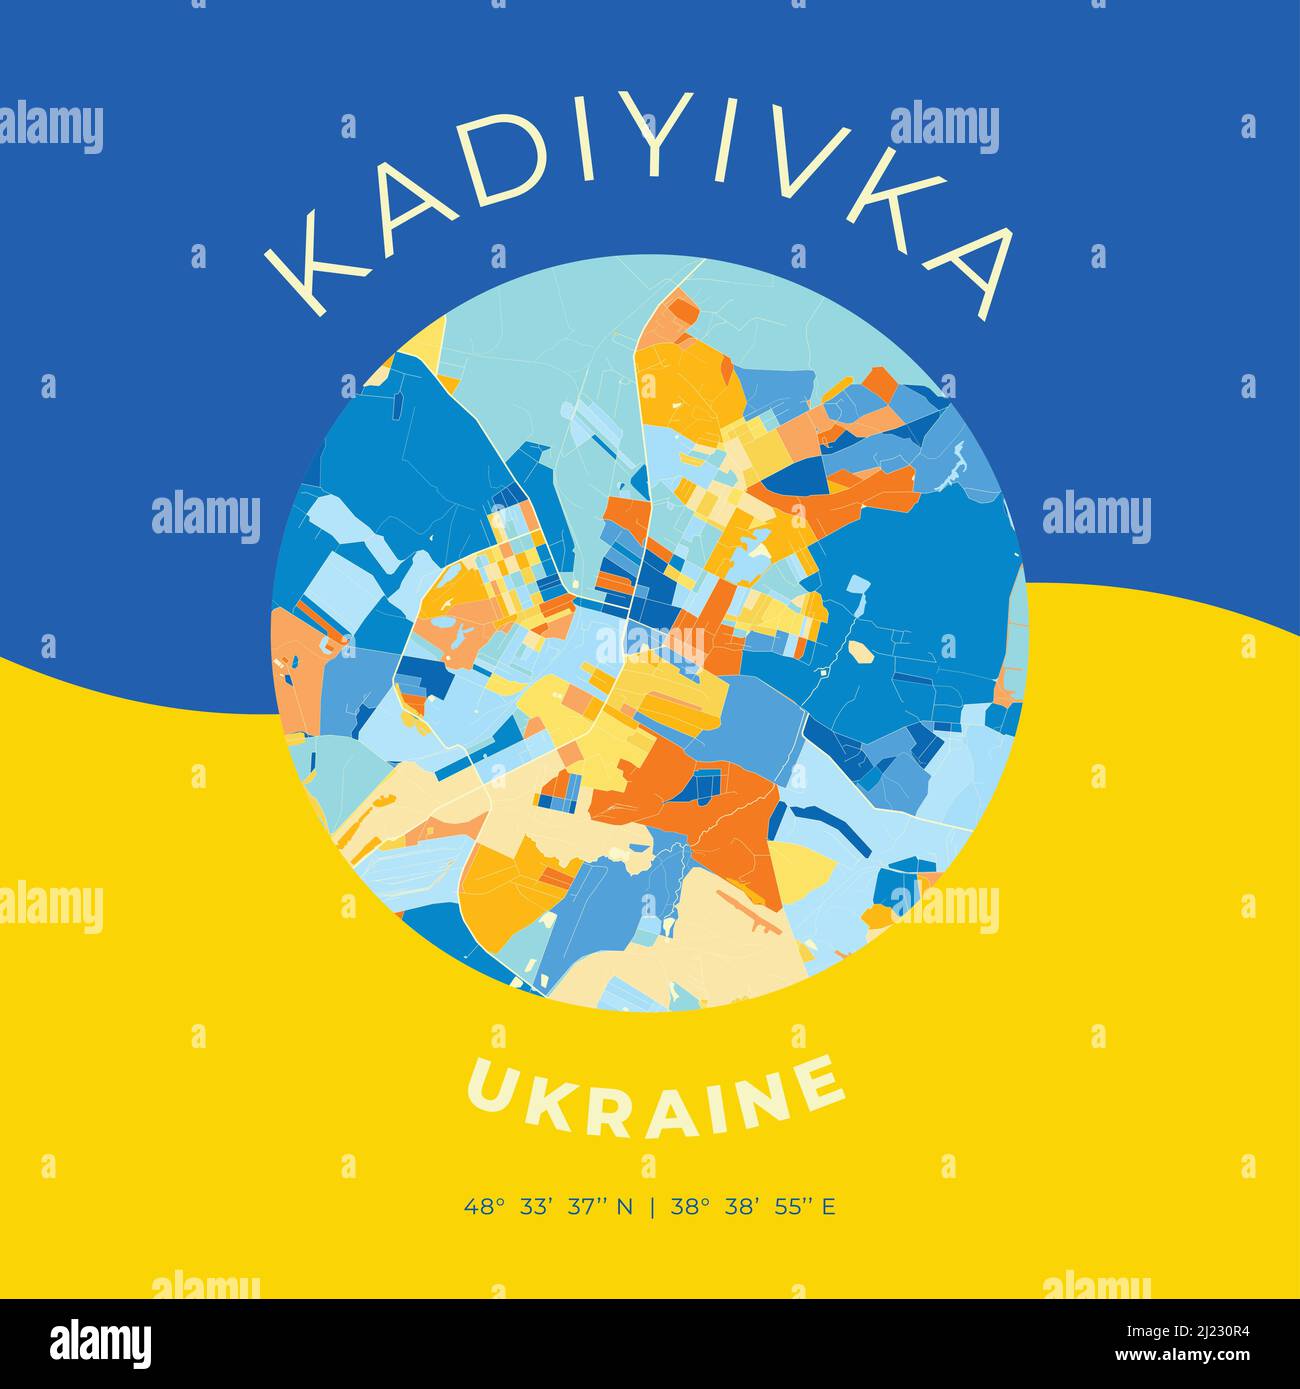 Vector map print template of Kadiyivka, Luhansk Oblast, Ukraine with bright blue, green and yellow colors. The various shades follow a radom principle Stock Vector